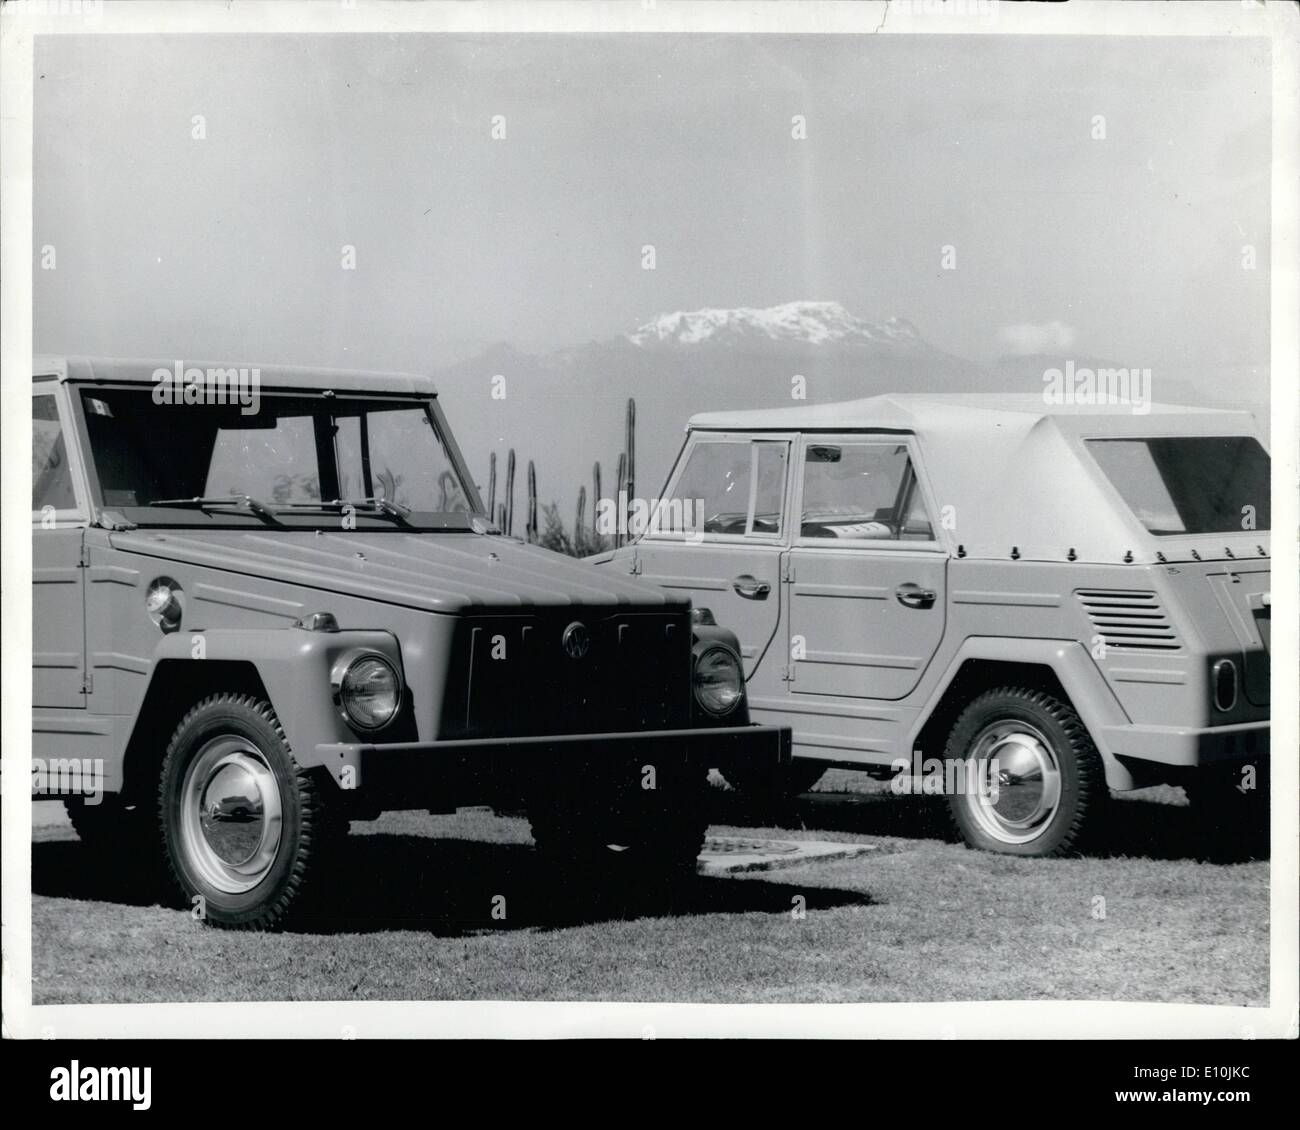 Mar. 03, 1973 - The first shipments of 12,000 VW Safari to the US start march 15, 1973. The Volkswagen Safari has so far not been exported to the Us in commercial quantities. The Safari is the latest relative of a military type landrover originally built for Rommel's desert warfare. The VW plant in Puebla, Mexico started to build the Safari in November 1970. A big expansion in the Mexican production of VW cars has originally been planned to satisfy not only the Mexican market, but to be shipped to all parts of the globe. In an official celebration Pres Stock Photo